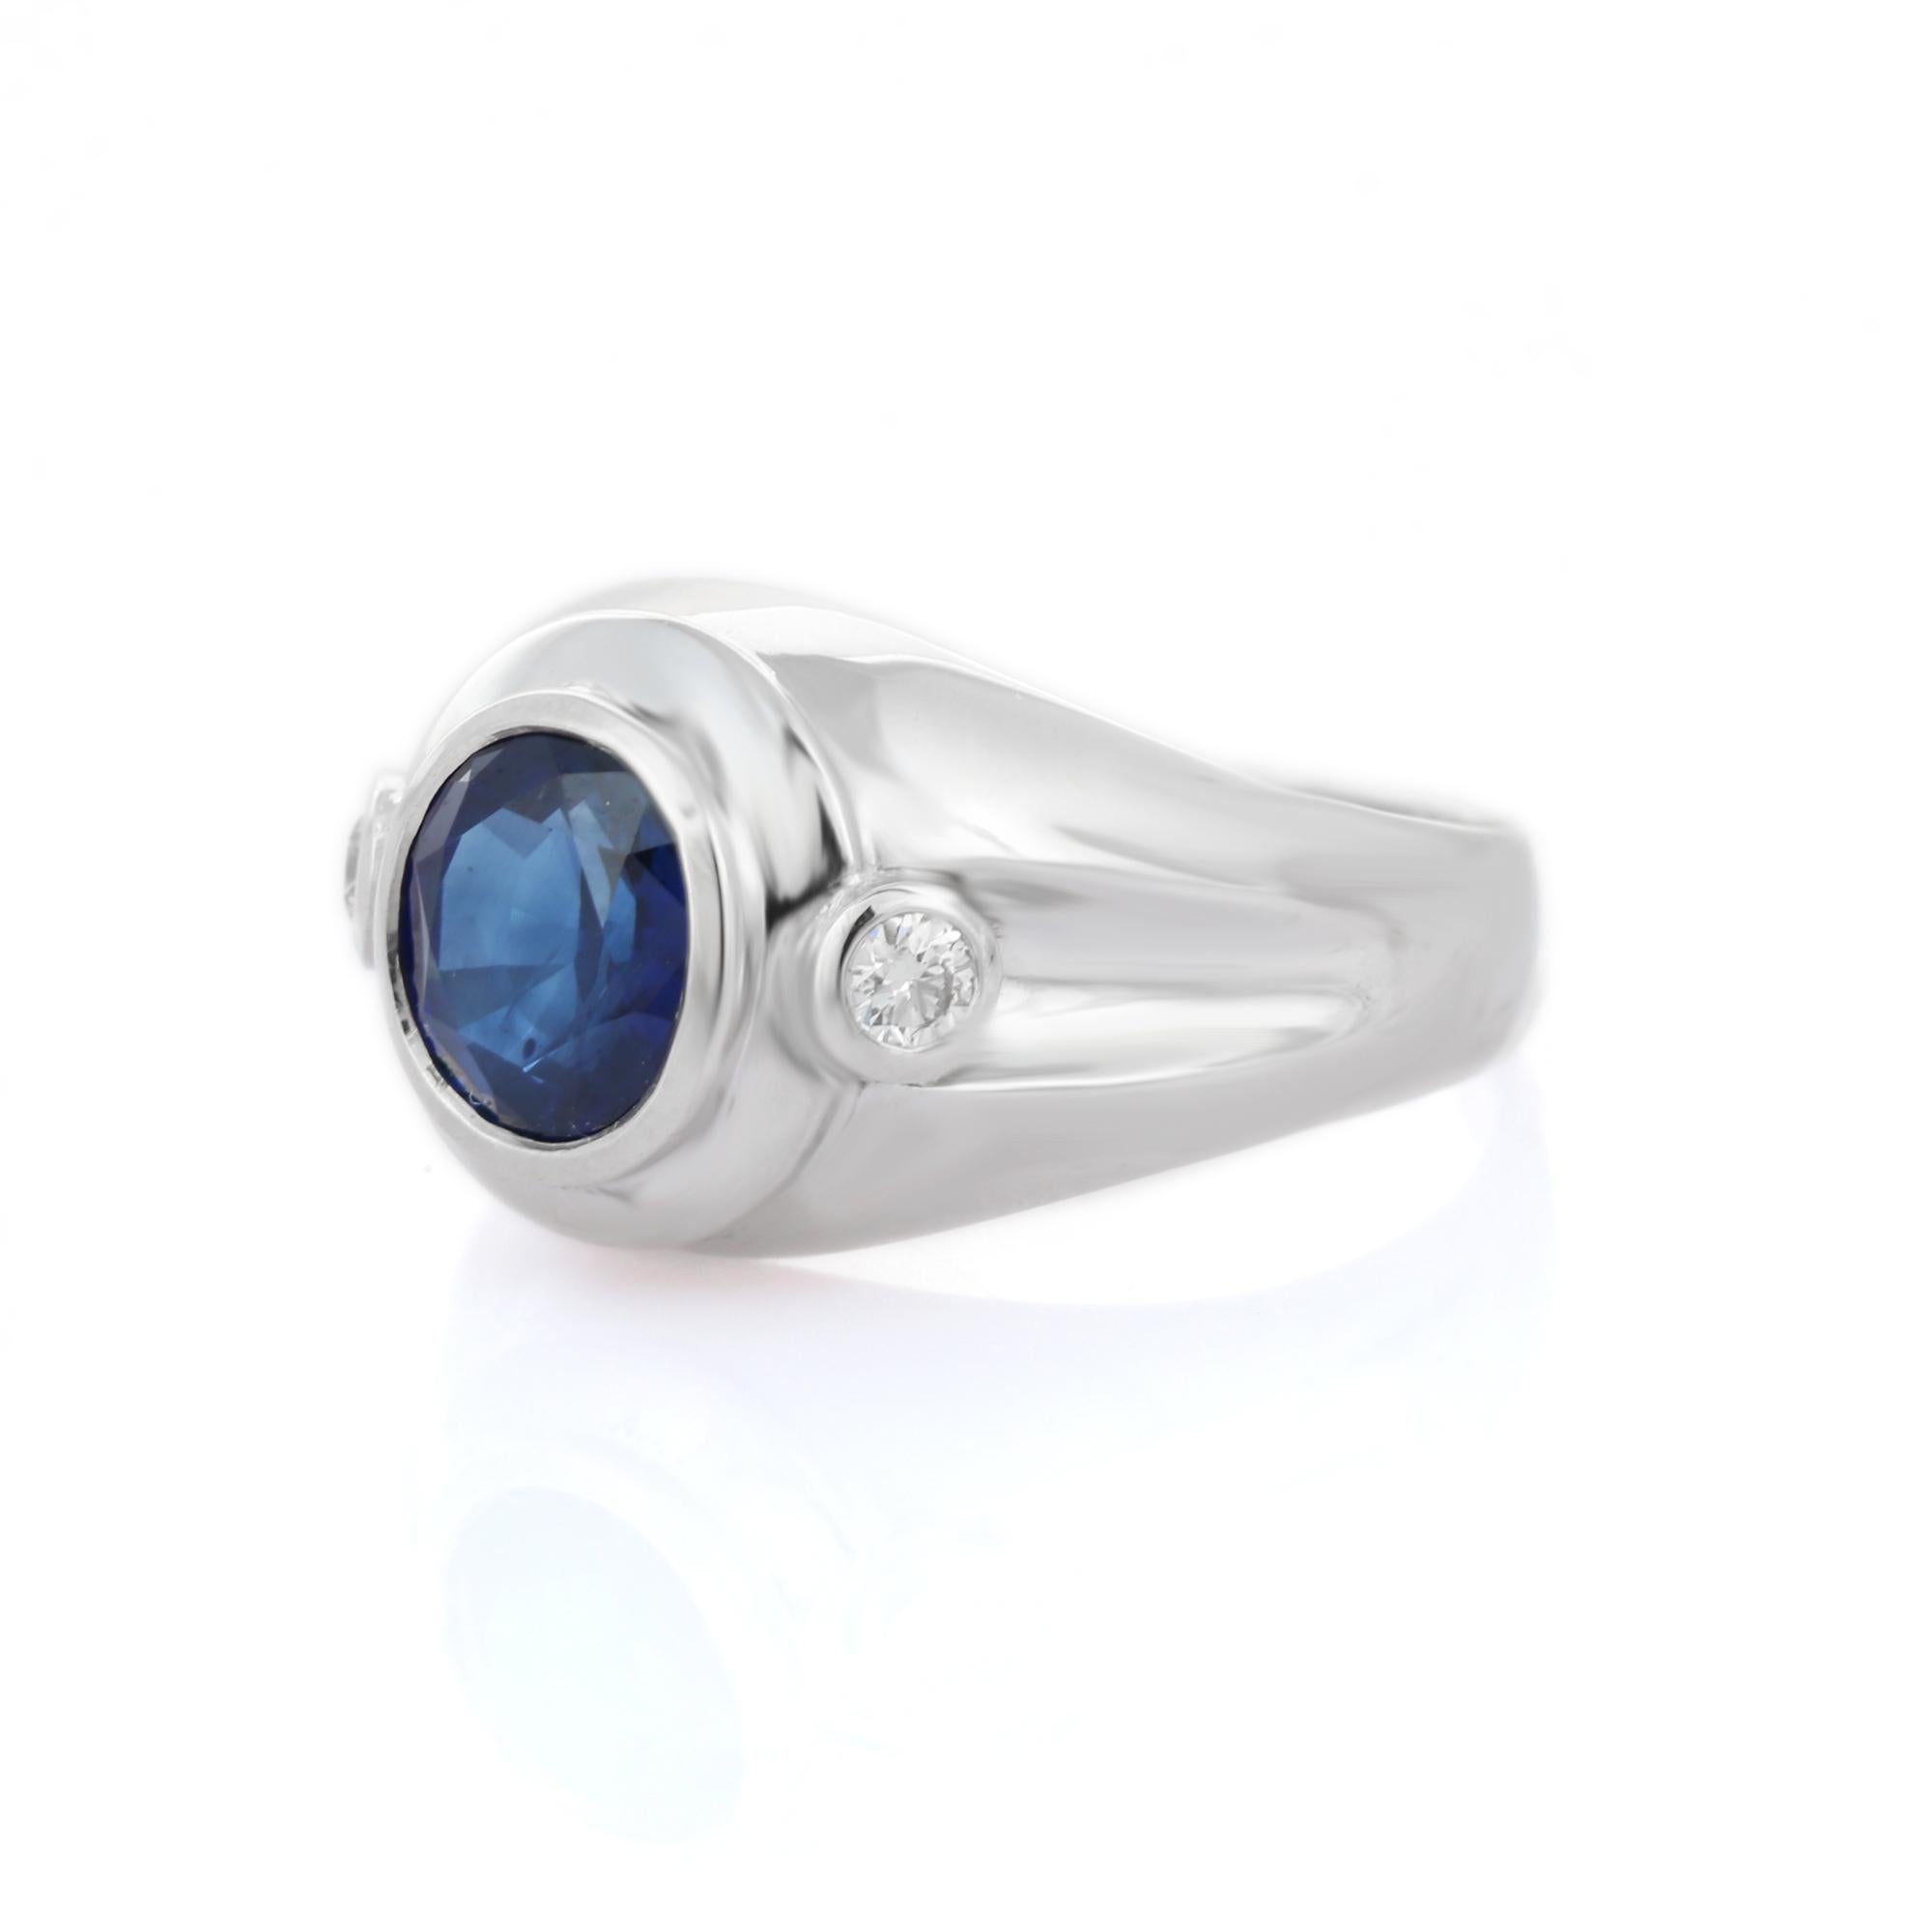 For Sale:  Blue Sapphire and Diamond Statement Wedding Ring for Men in 18k Solid White Gold 3